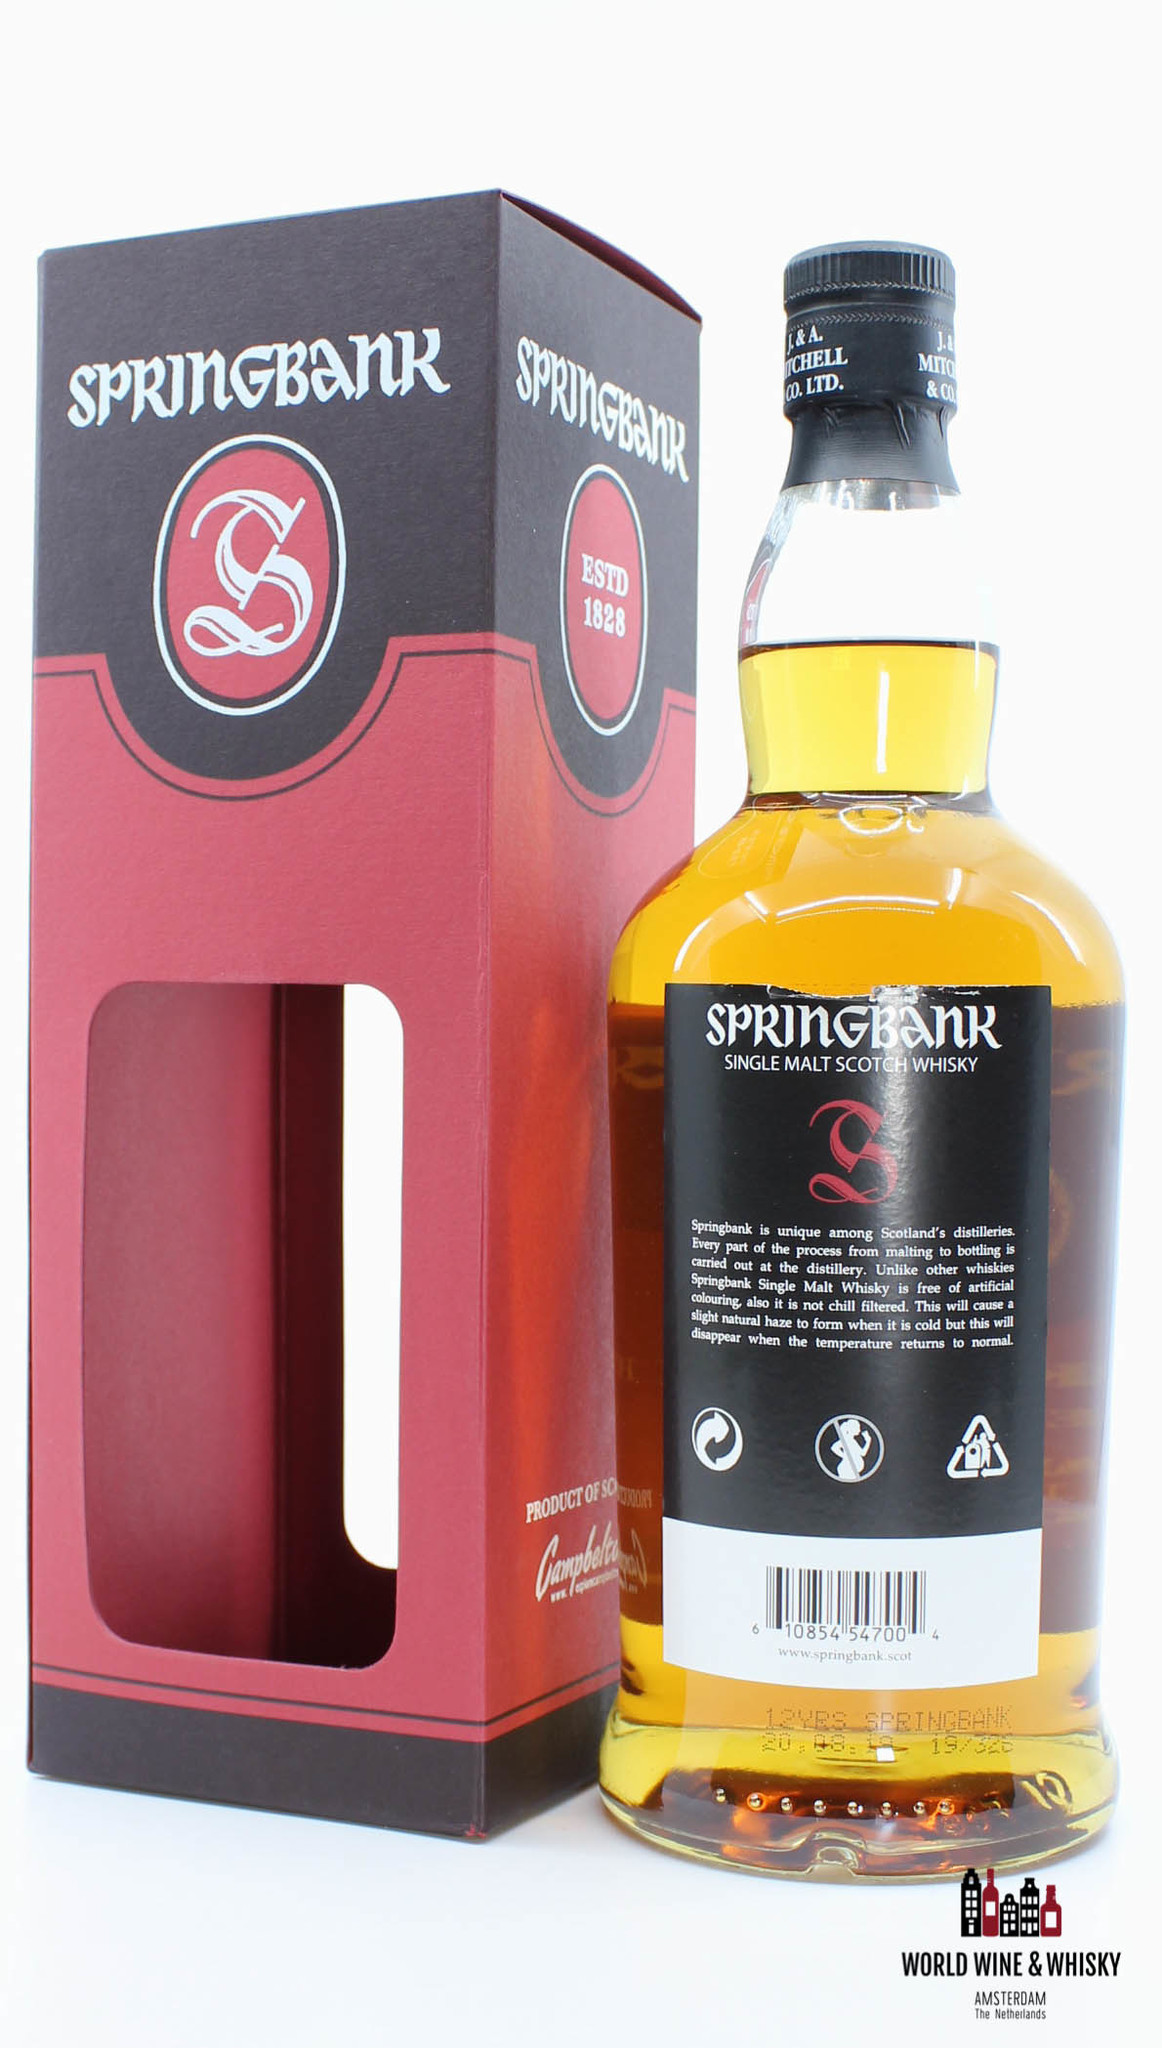 Springbank Springbank 12 Years Old 2019 57.1% (Red label and box)